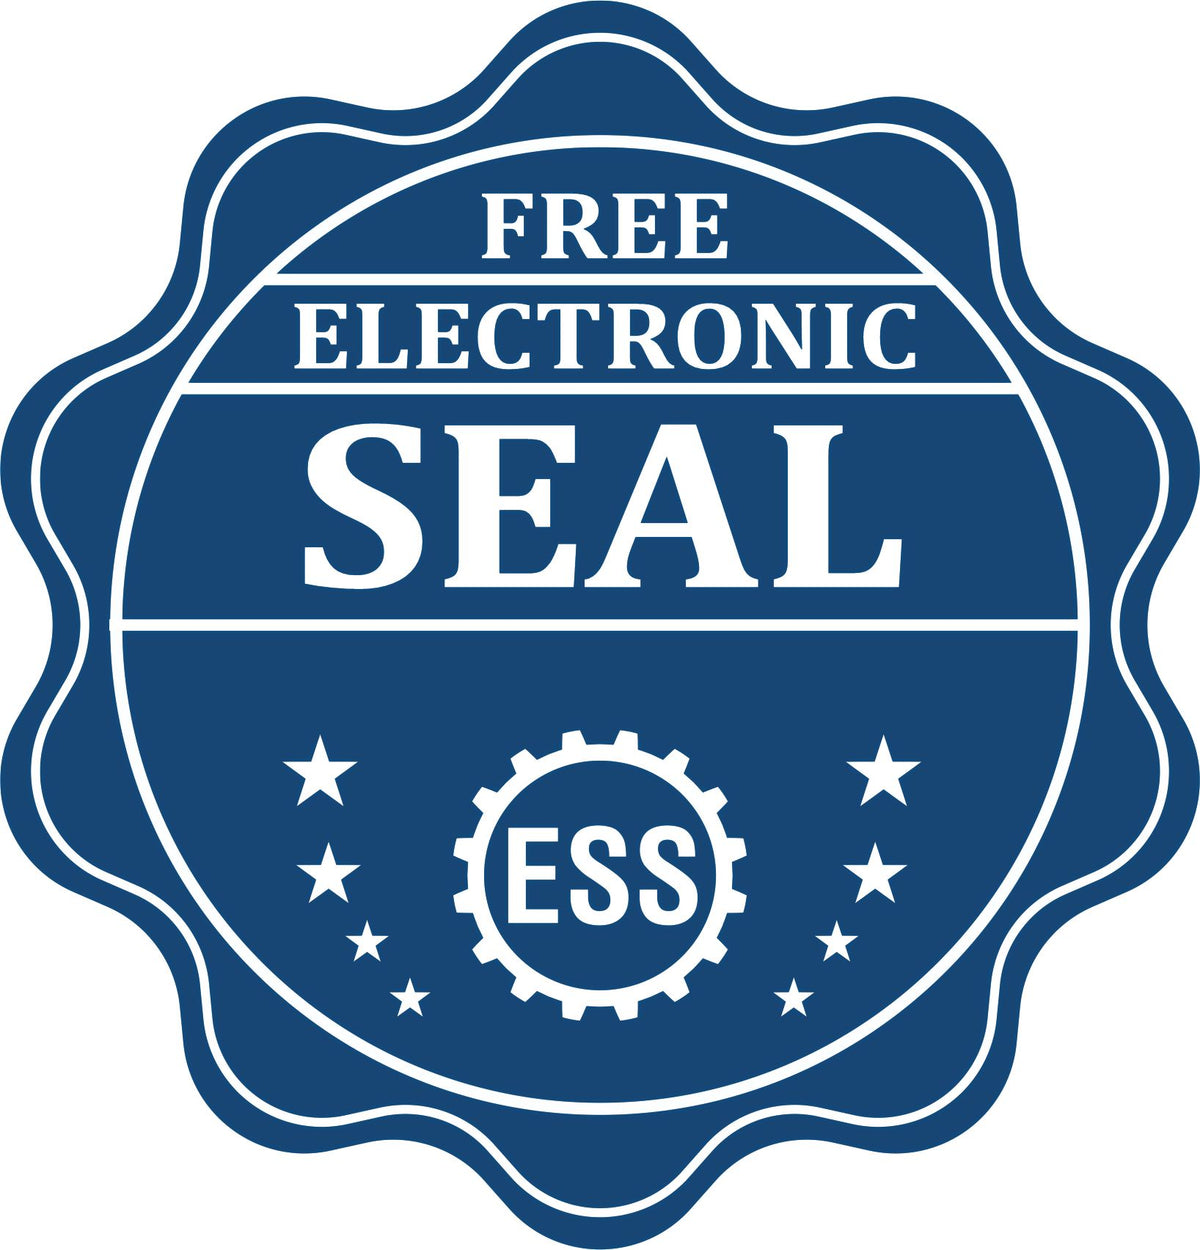 A badge showing a free electronic seal for the Slim Pre-Inked Massachusetts Landscape Architect Seal Stamp with stars and the ESS gear on the emblem.